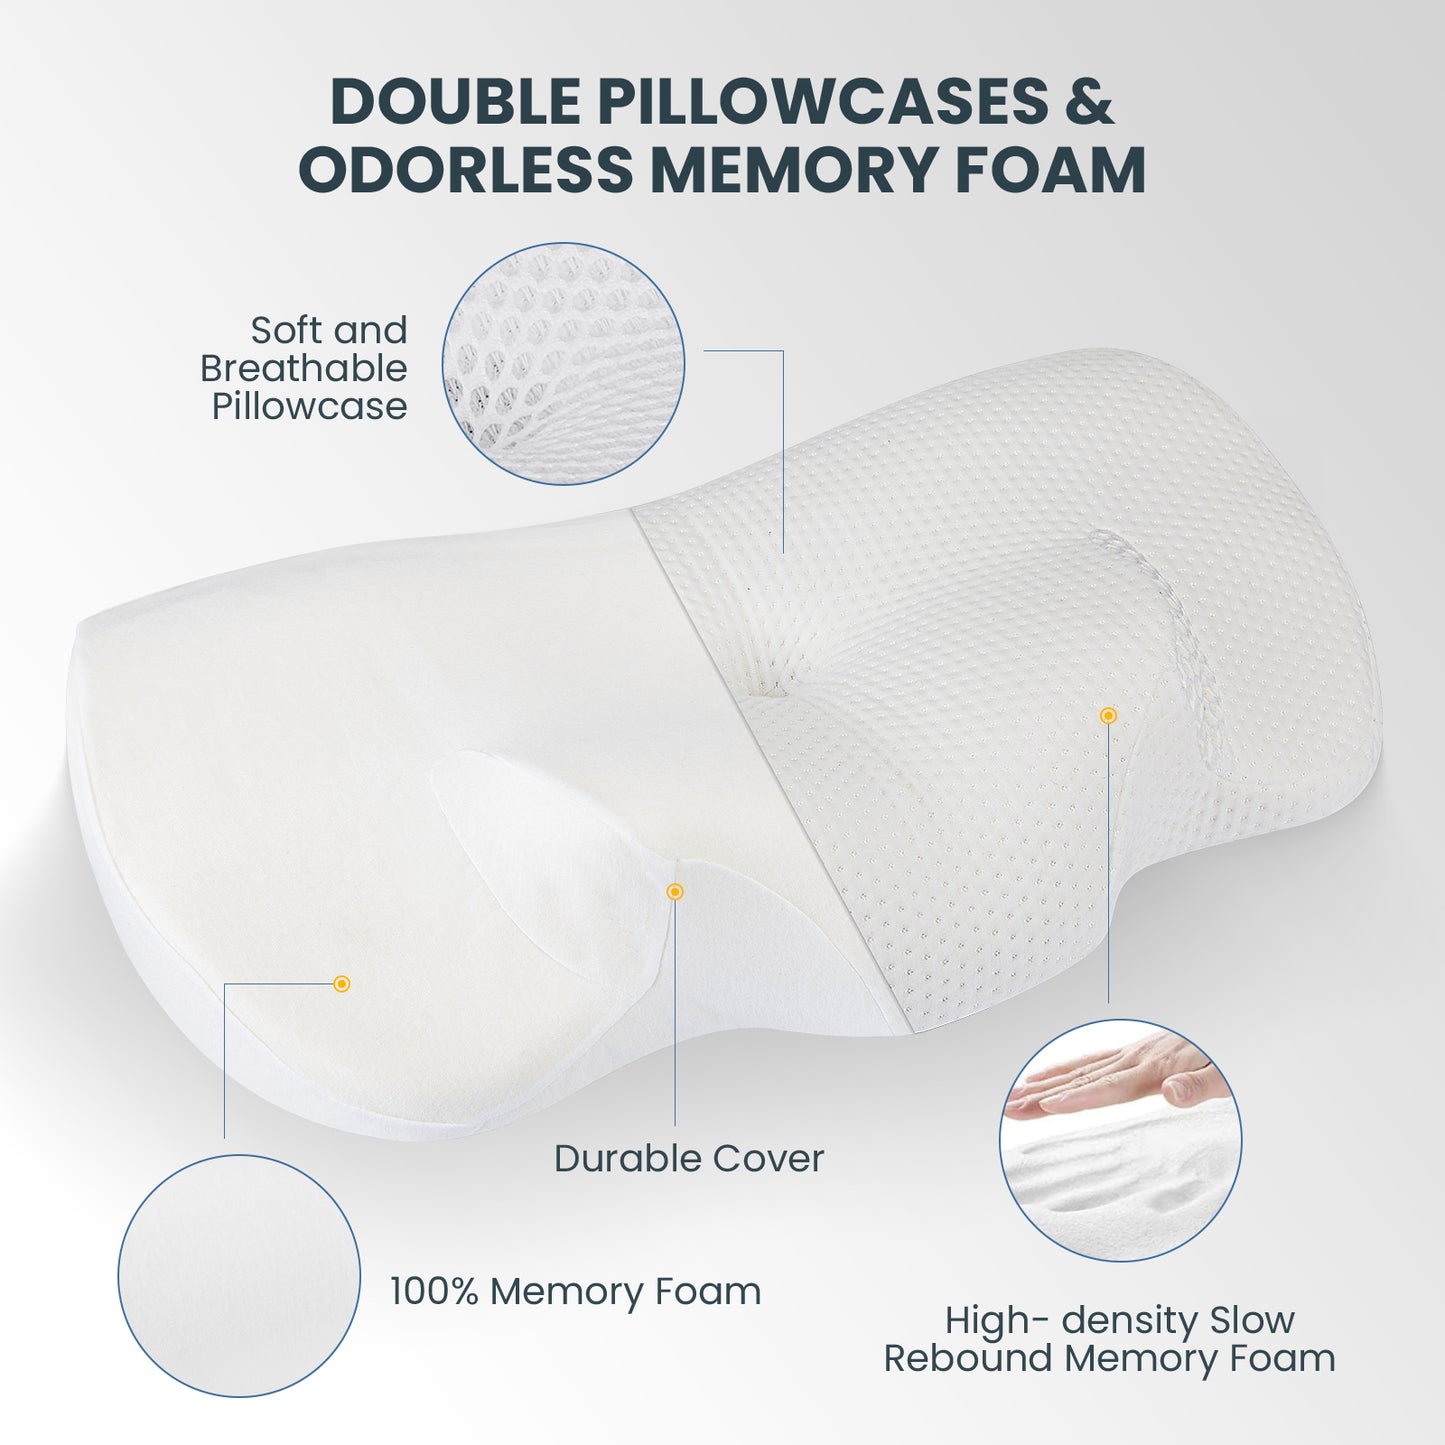 Tealhome Cervical Memory Foam Neck Support Pillow T256